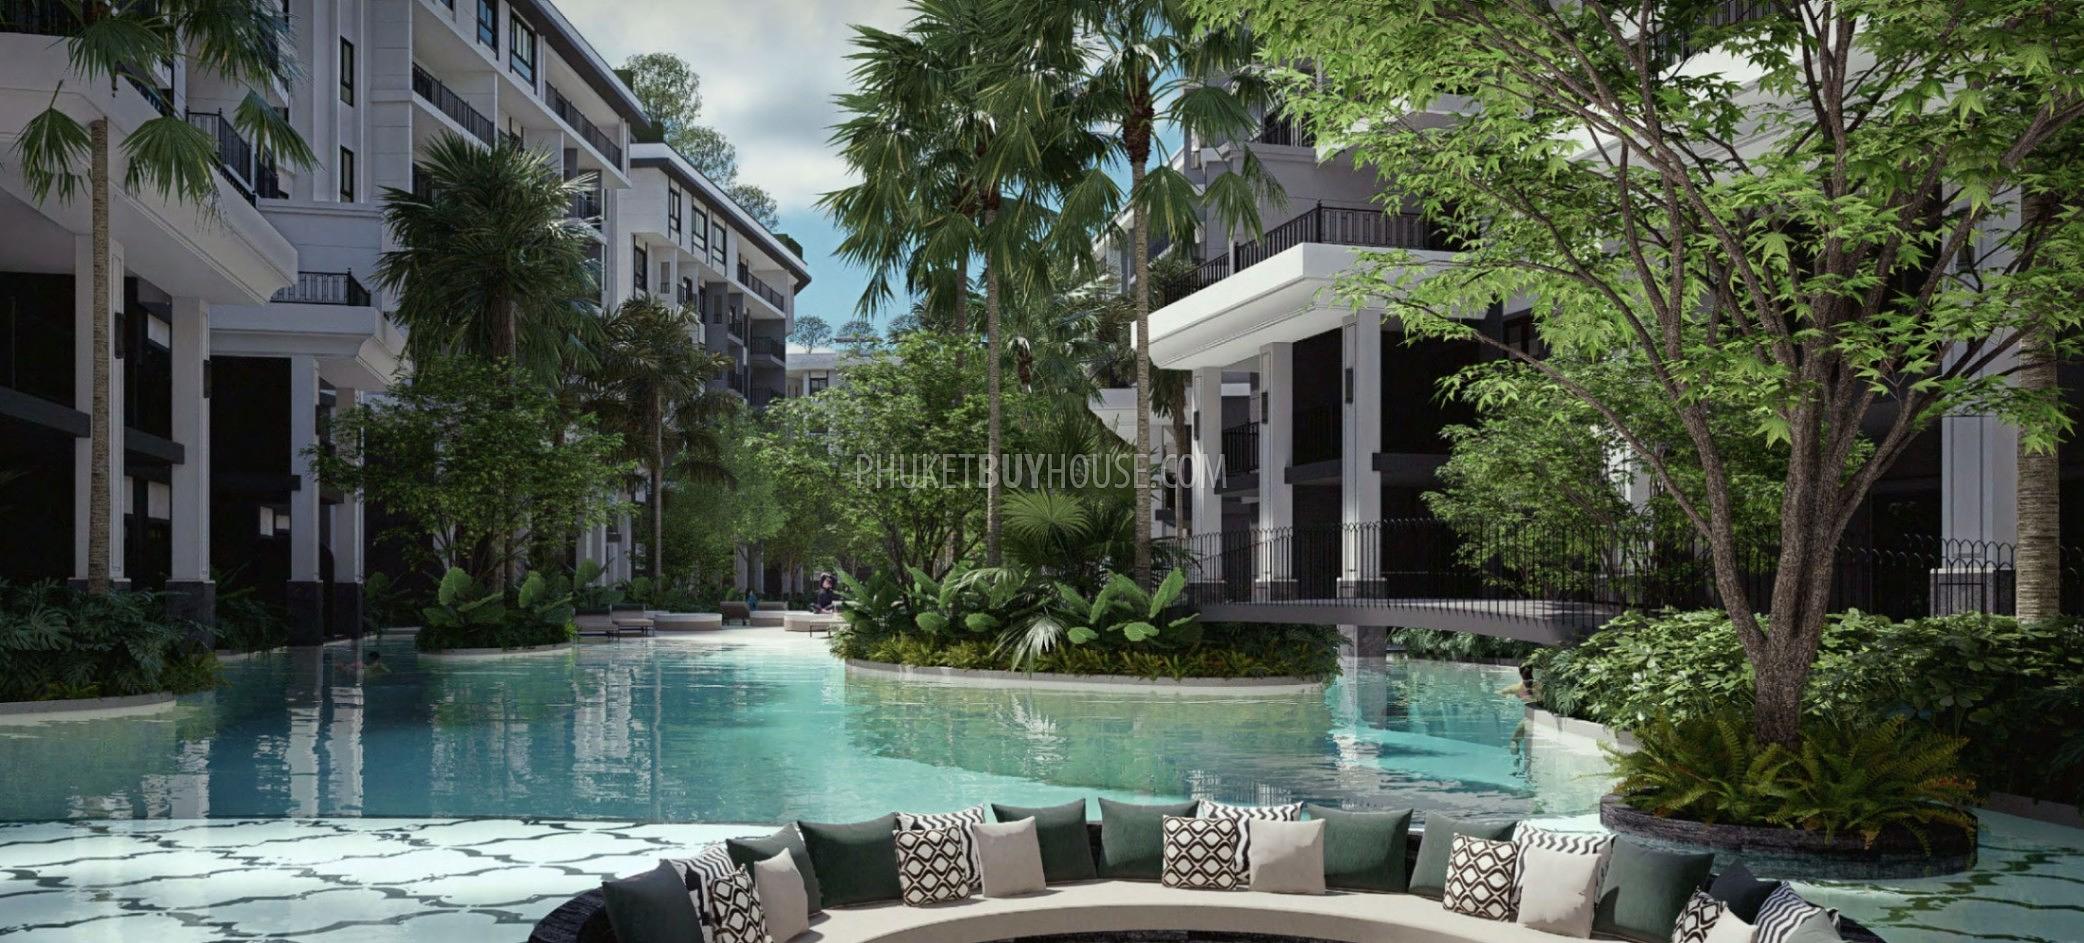 BAN22025: Fancy Two Bedroom Apartment For Sale in Bang Tao. Photo #4